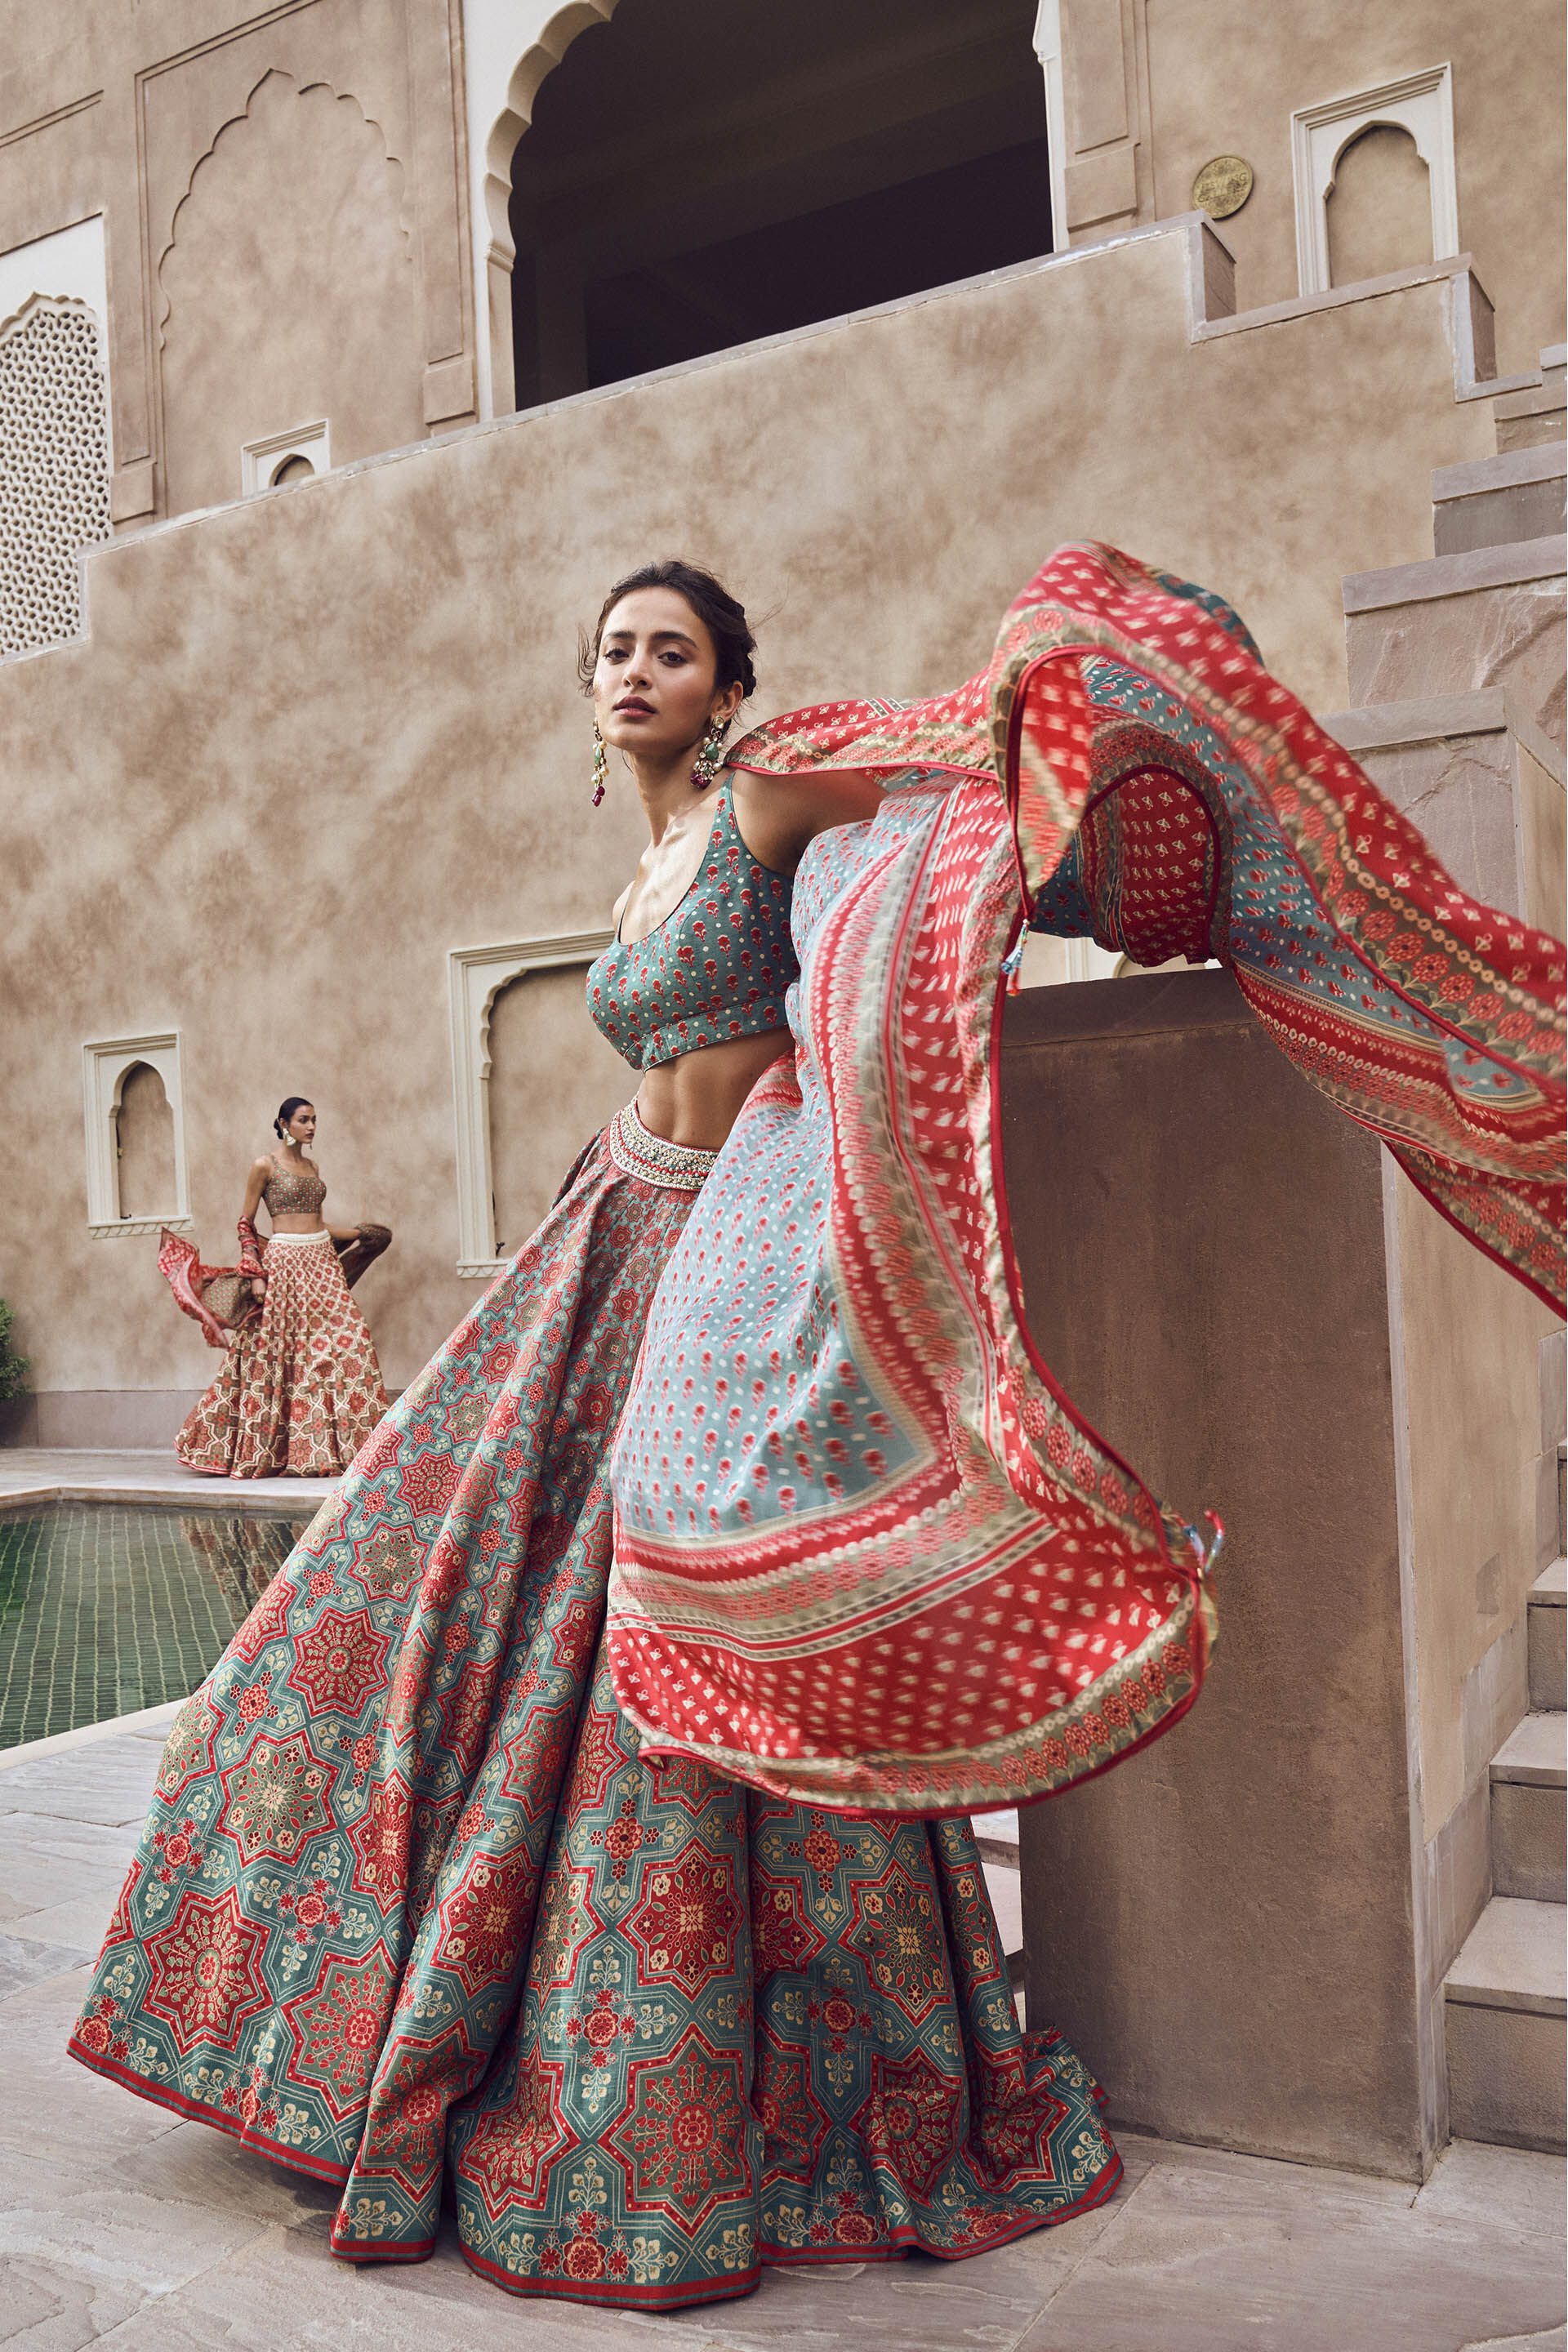 How Much Does An Anita Dongre Bridal Lehenga Really Costs? – ShaadiWish